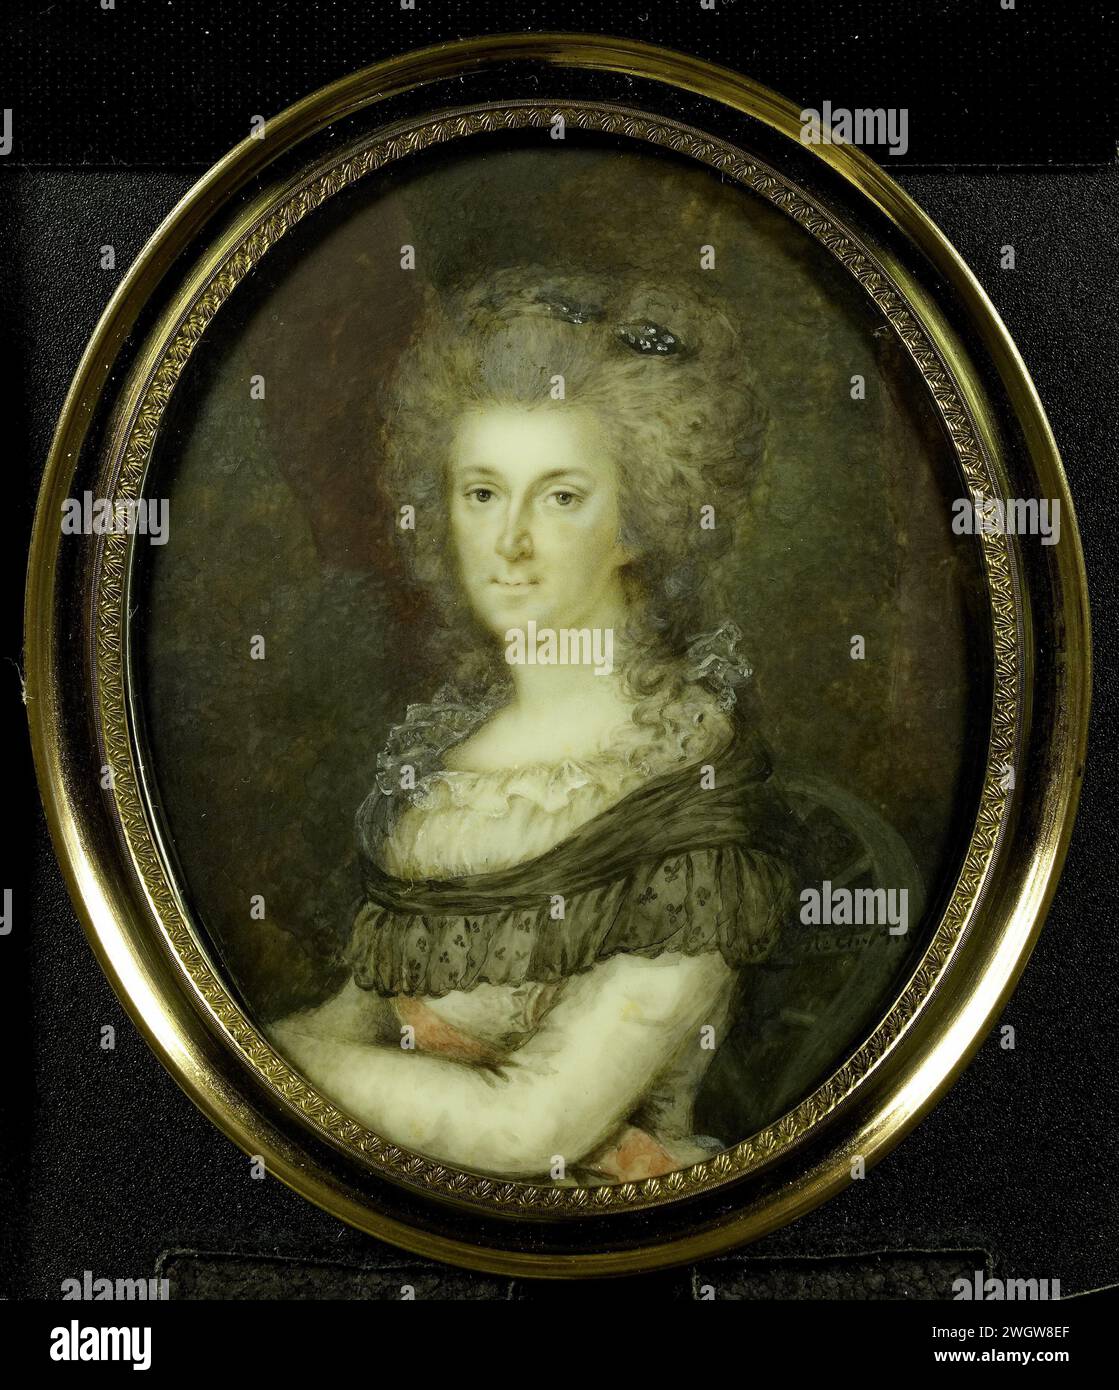 Frederika Sophia Wilhelmina (Wilhelmina; 1747-1820), princess of Prussia. Wife of Prince Willem V, Johannes Emilius Phaff, 1767 - 1820 miniature (painting) Portrait of Frederika Sophia Wilhelmina (1747-1820), princess of Prussia. Wife of Prince Willem V. Ten Halven Lijve, sitting in a chair, to the left. Part of the portrait miniatures collection.  ivory. metal. glass Stock Photo